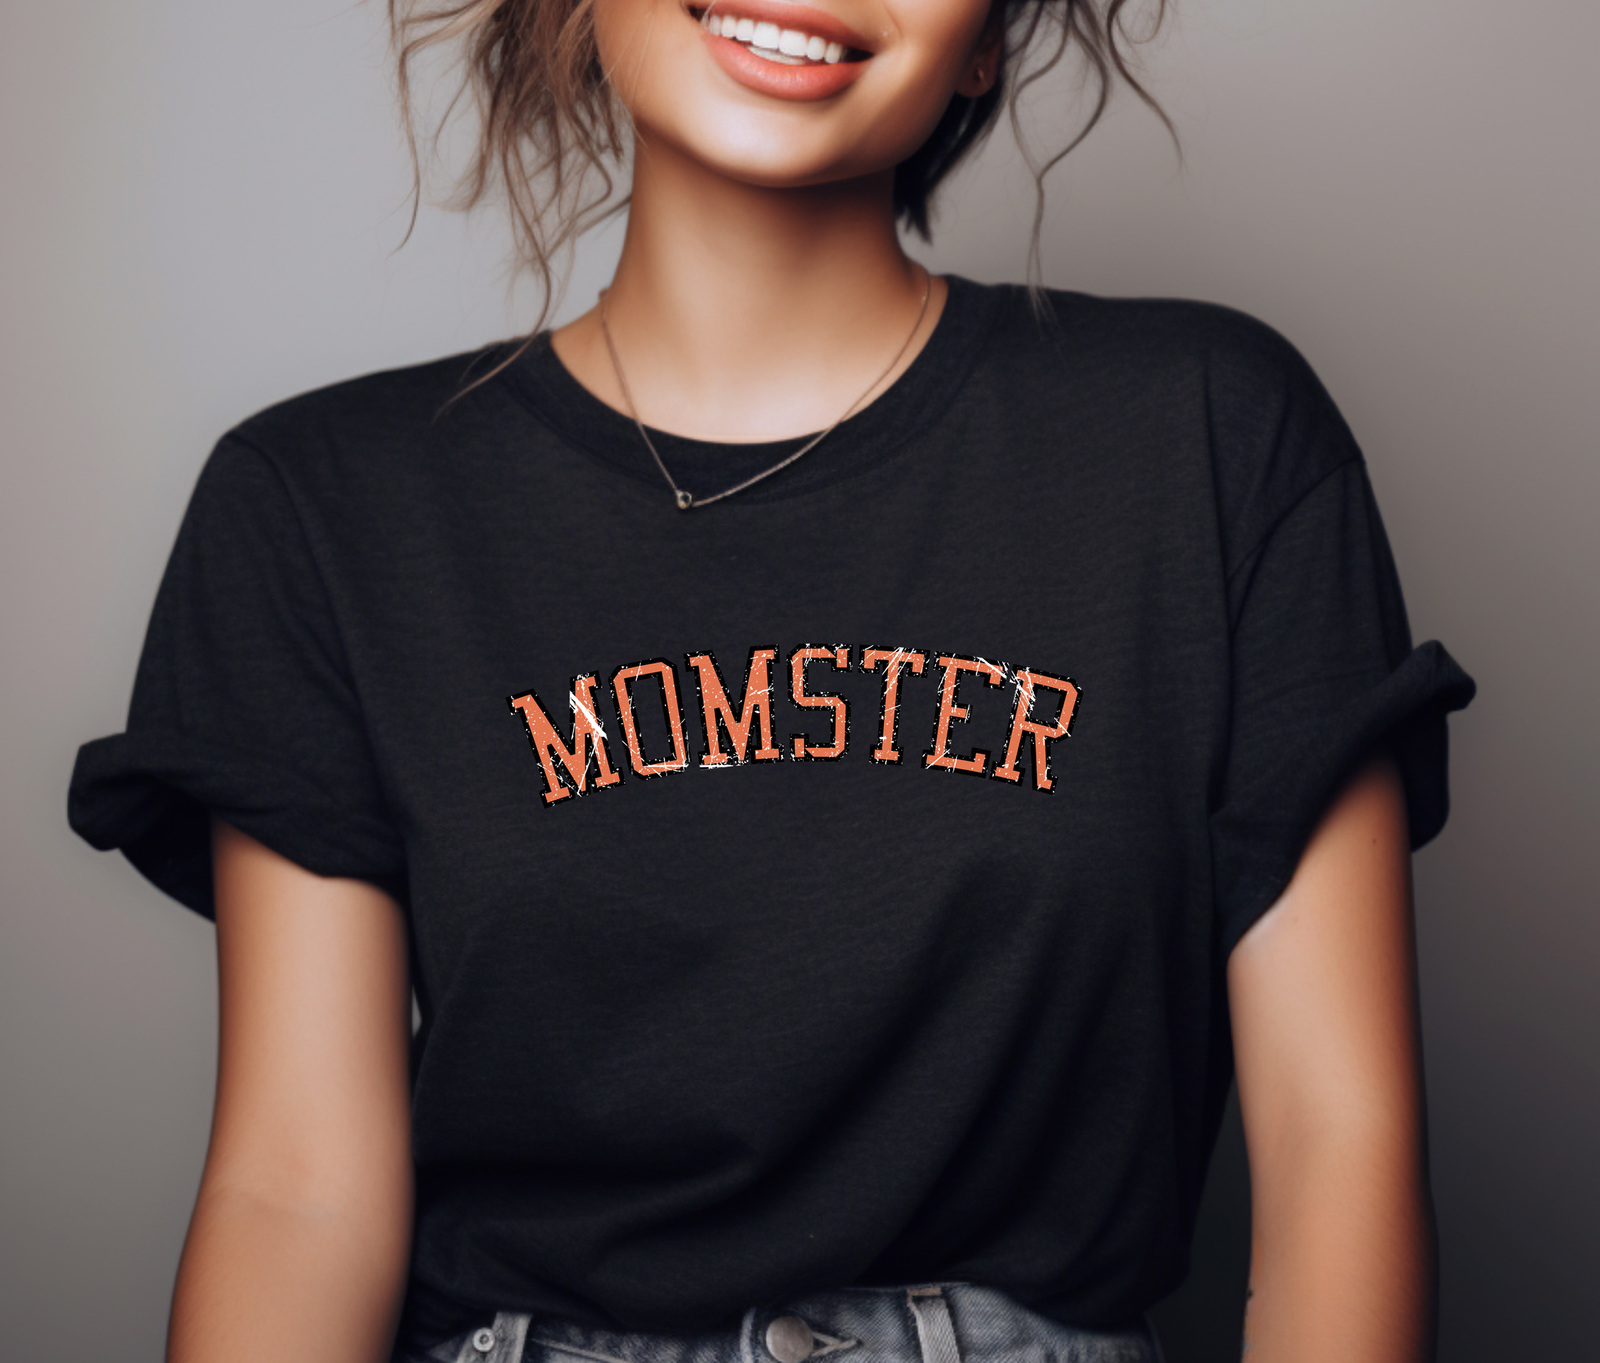 Primary image for Momster Halloween Shirt for Women - Cute and Creepy Mommy Monster Costume Top, P